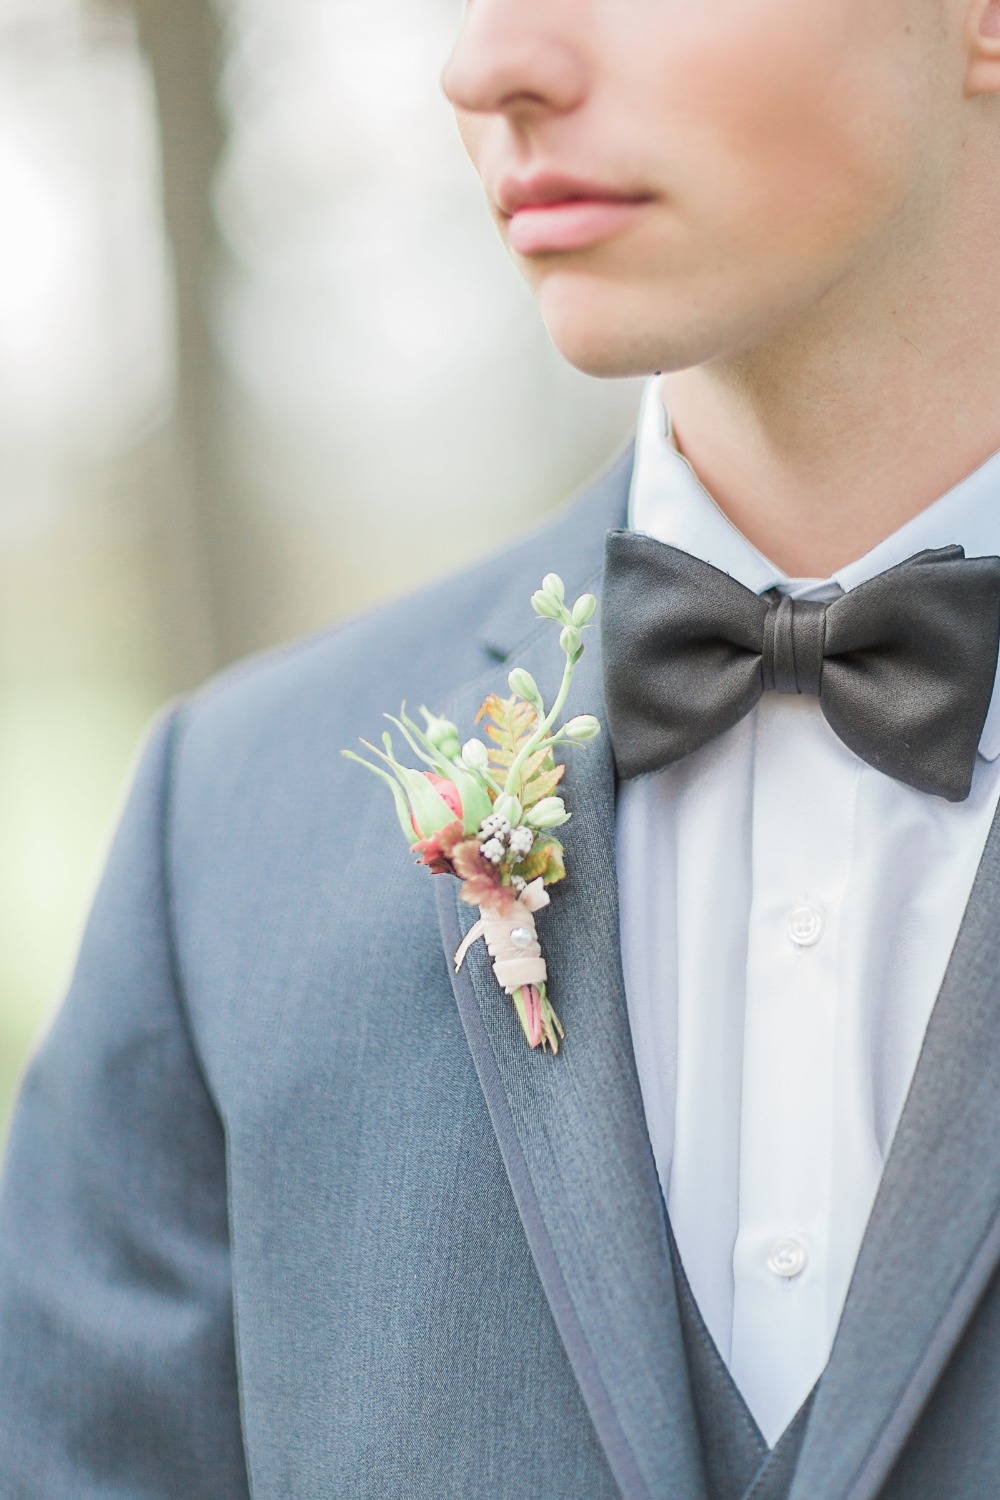 Bowtie and boutonniere